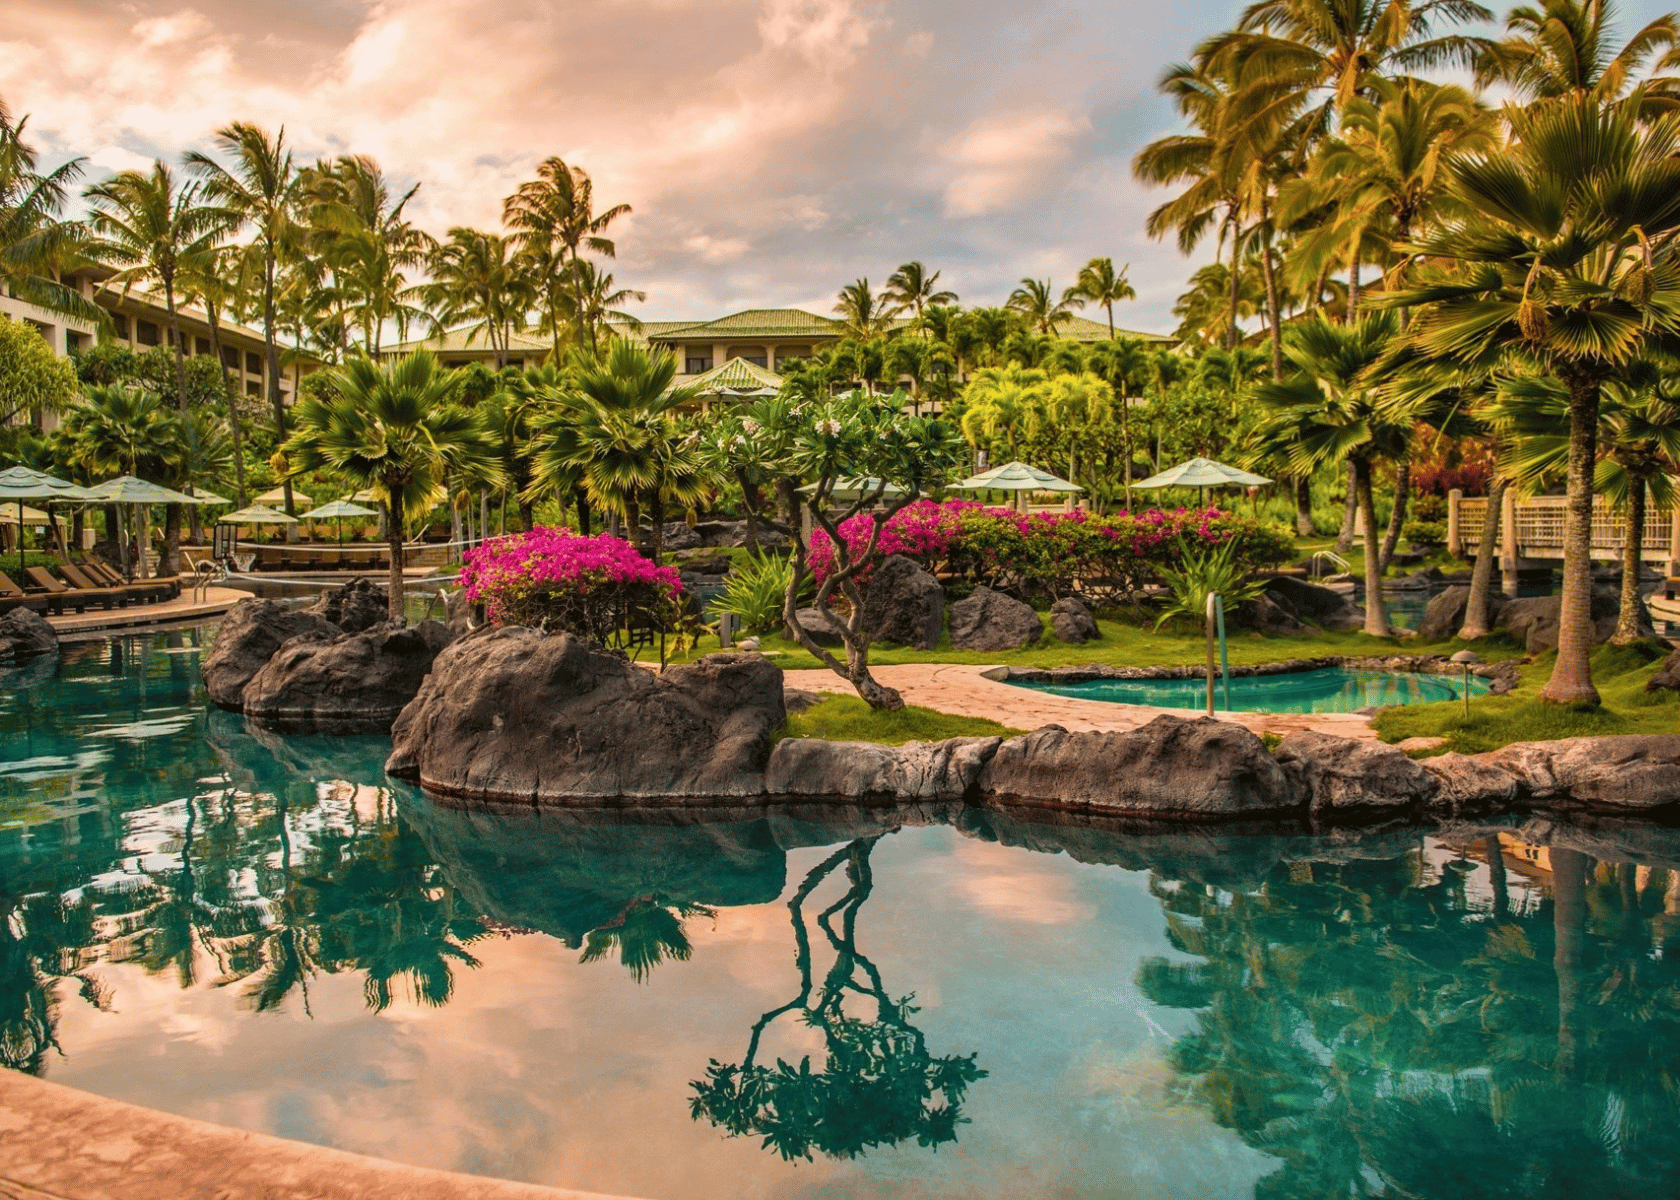 The Best Places to Stay in Hawaii- Destination Island Guide